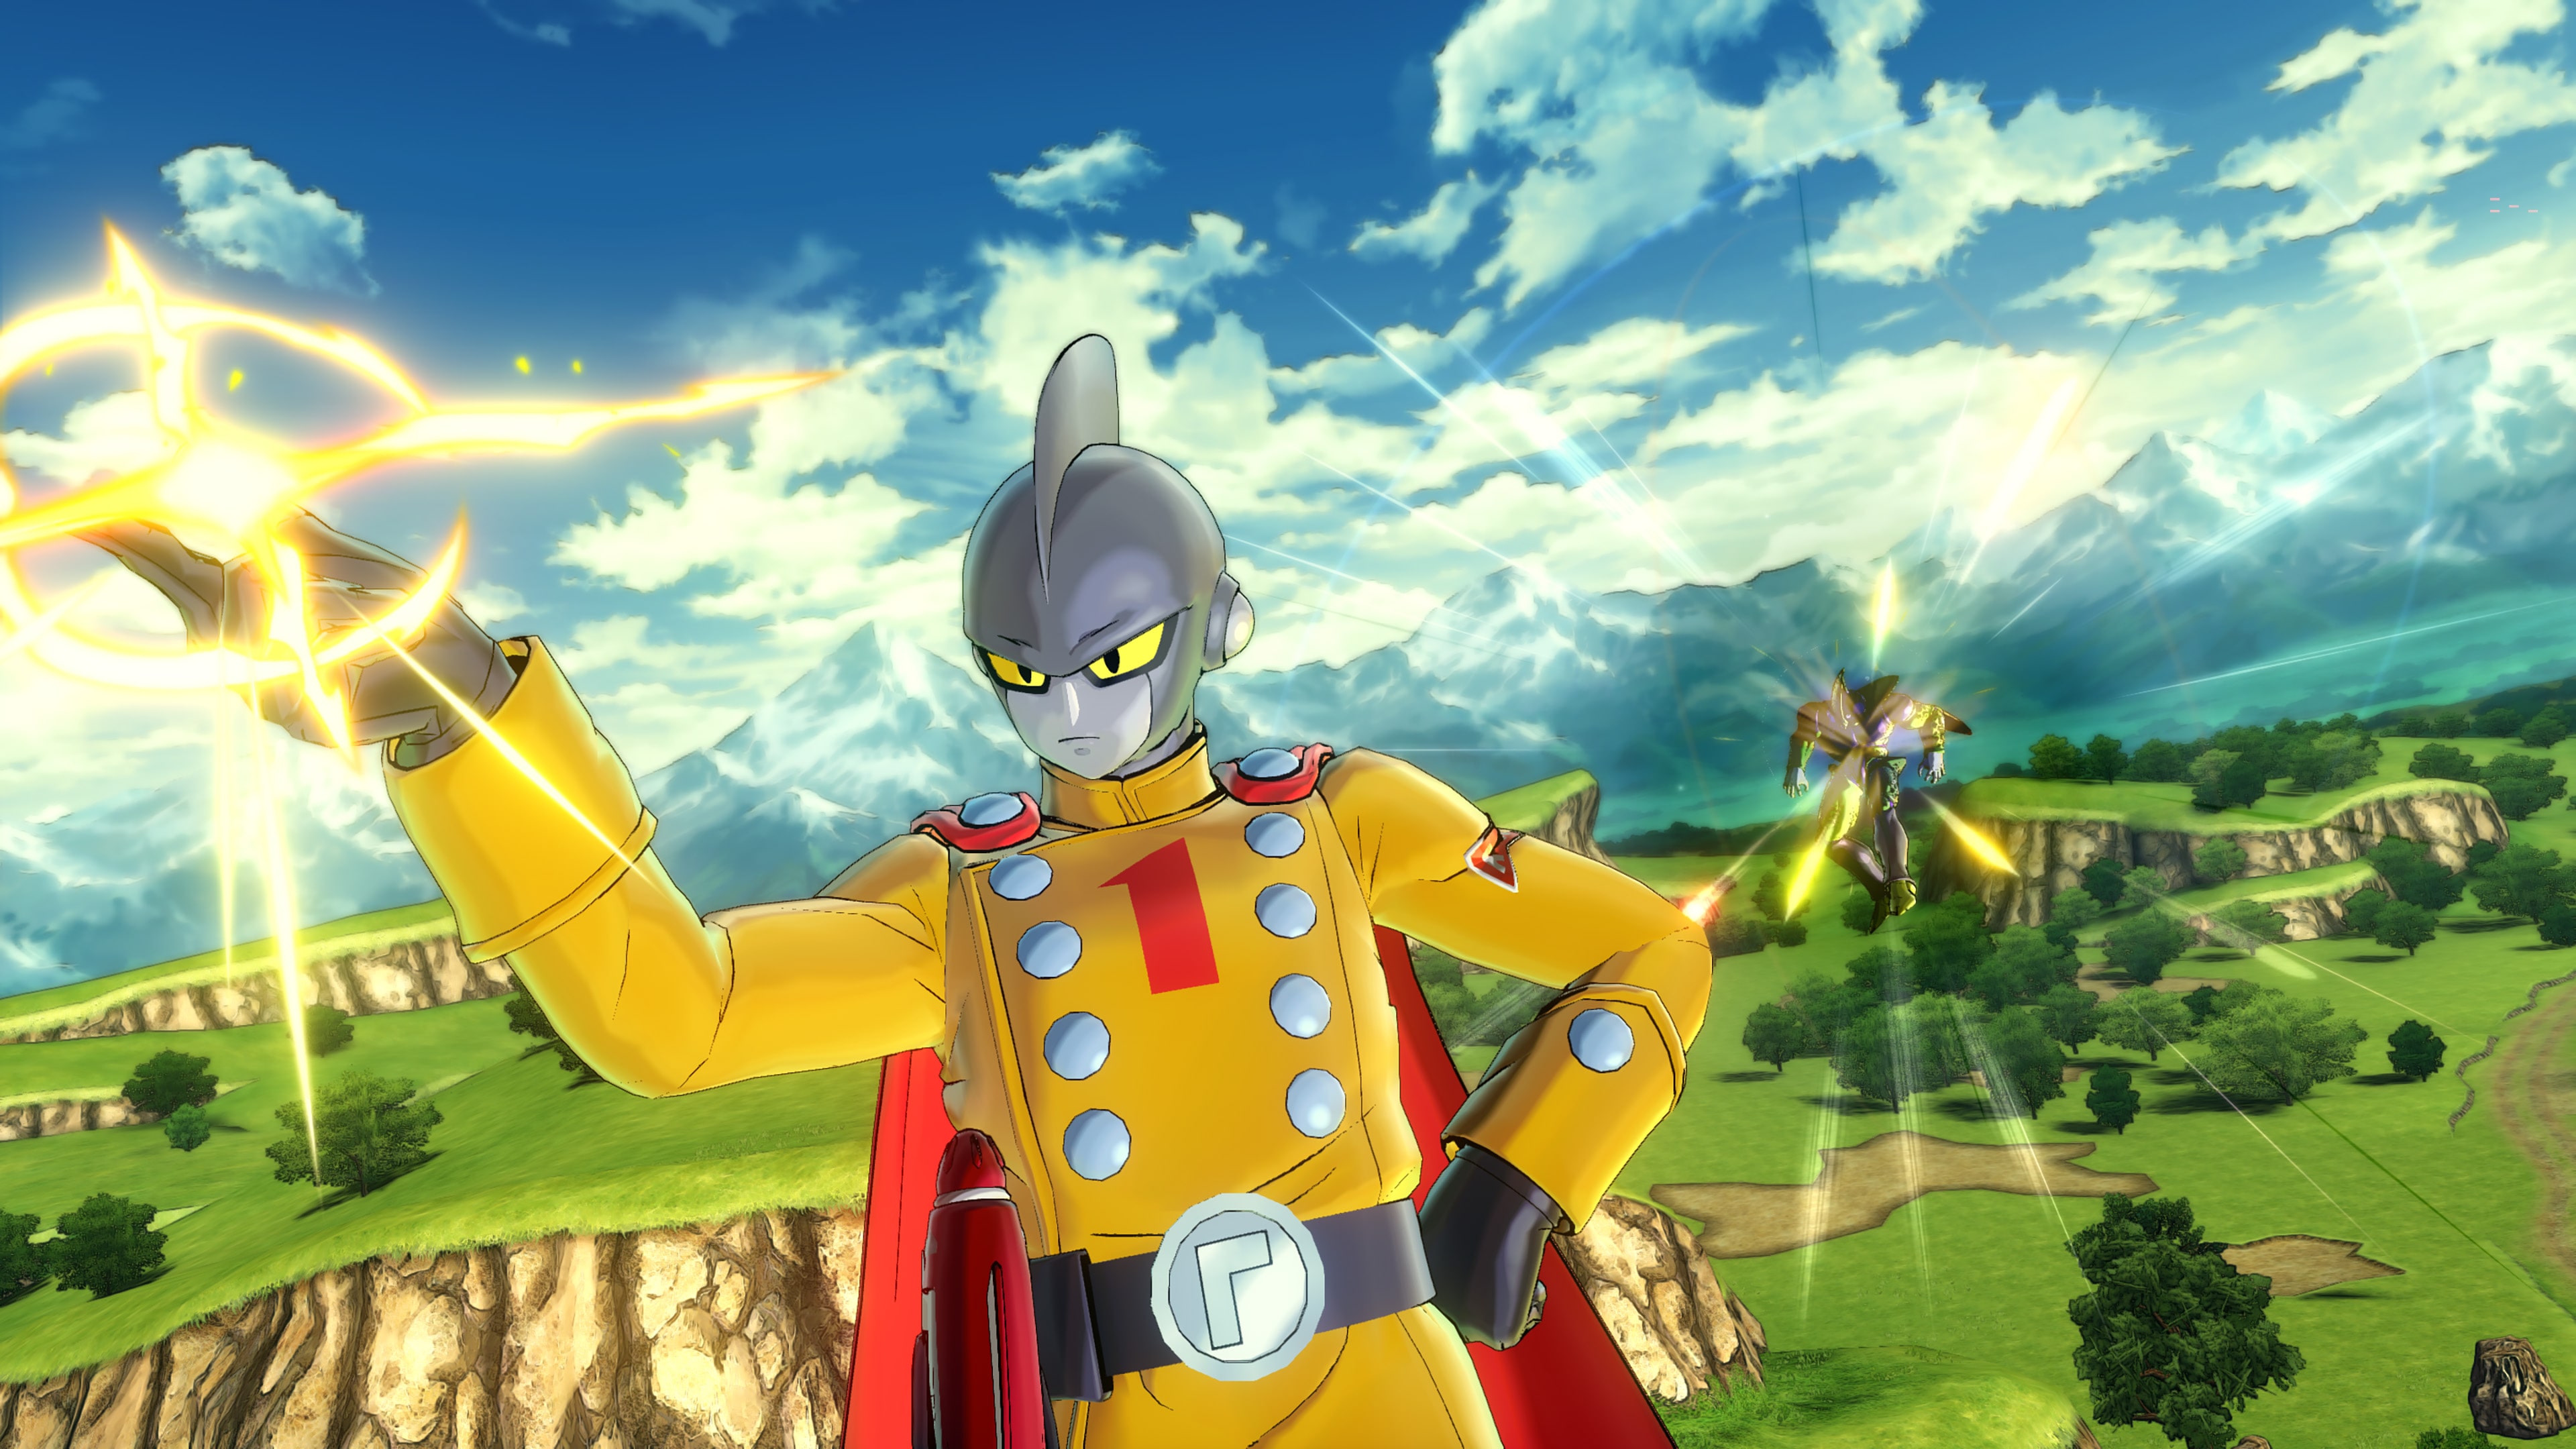 7 dragons balls, 50 TP Medals, and The new outfit. How? : r/dbxv